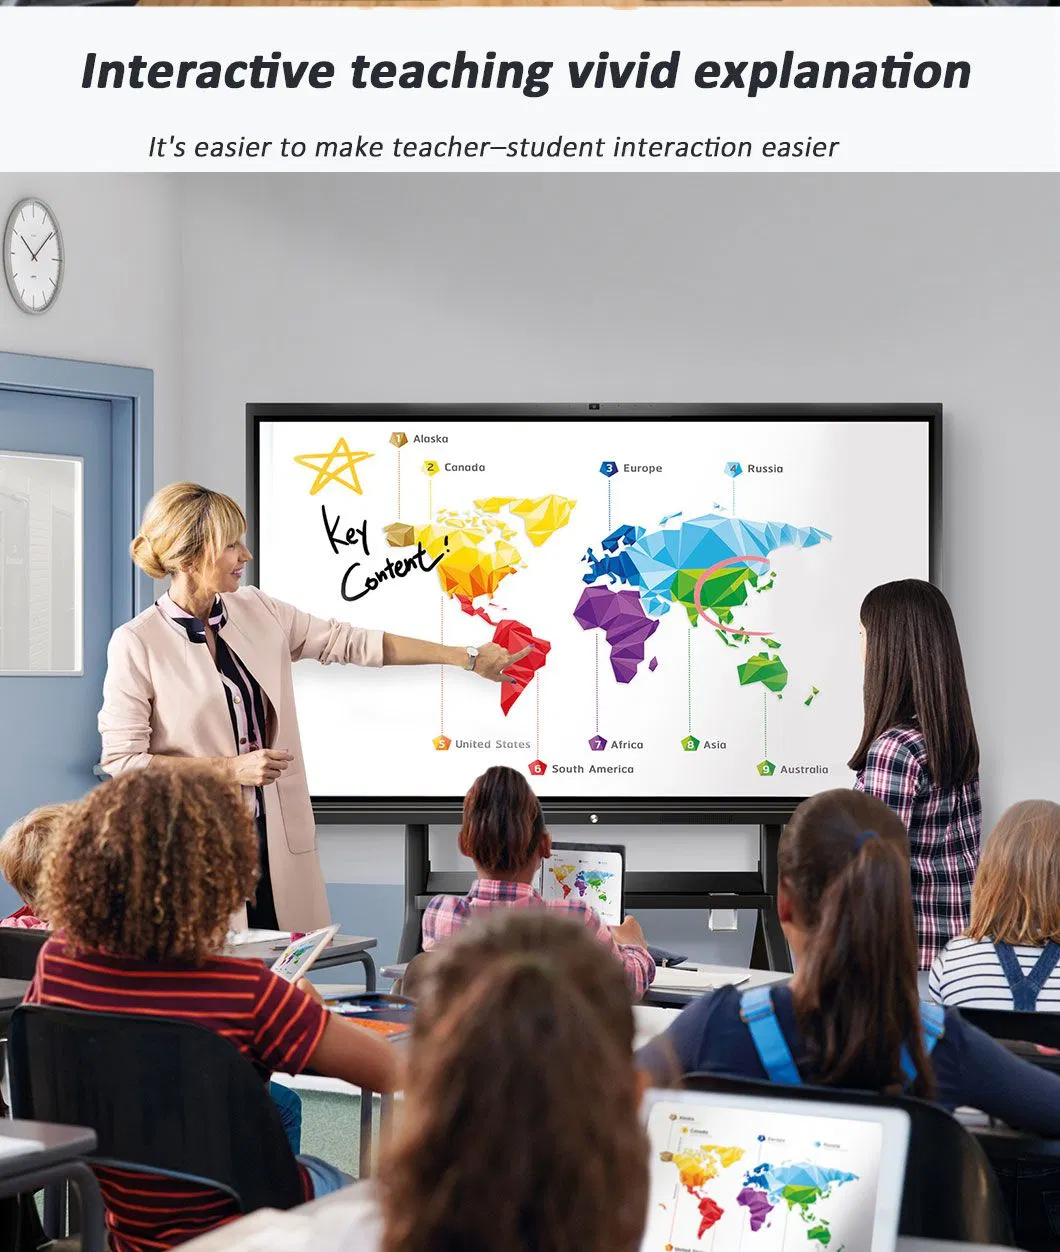 Customized Ultra HD 75inch Whiteboard Manufacturer OPS All in One IR Multi Touch Screen 4K Smart Board Interactive Flat Panel for School and Video Conference